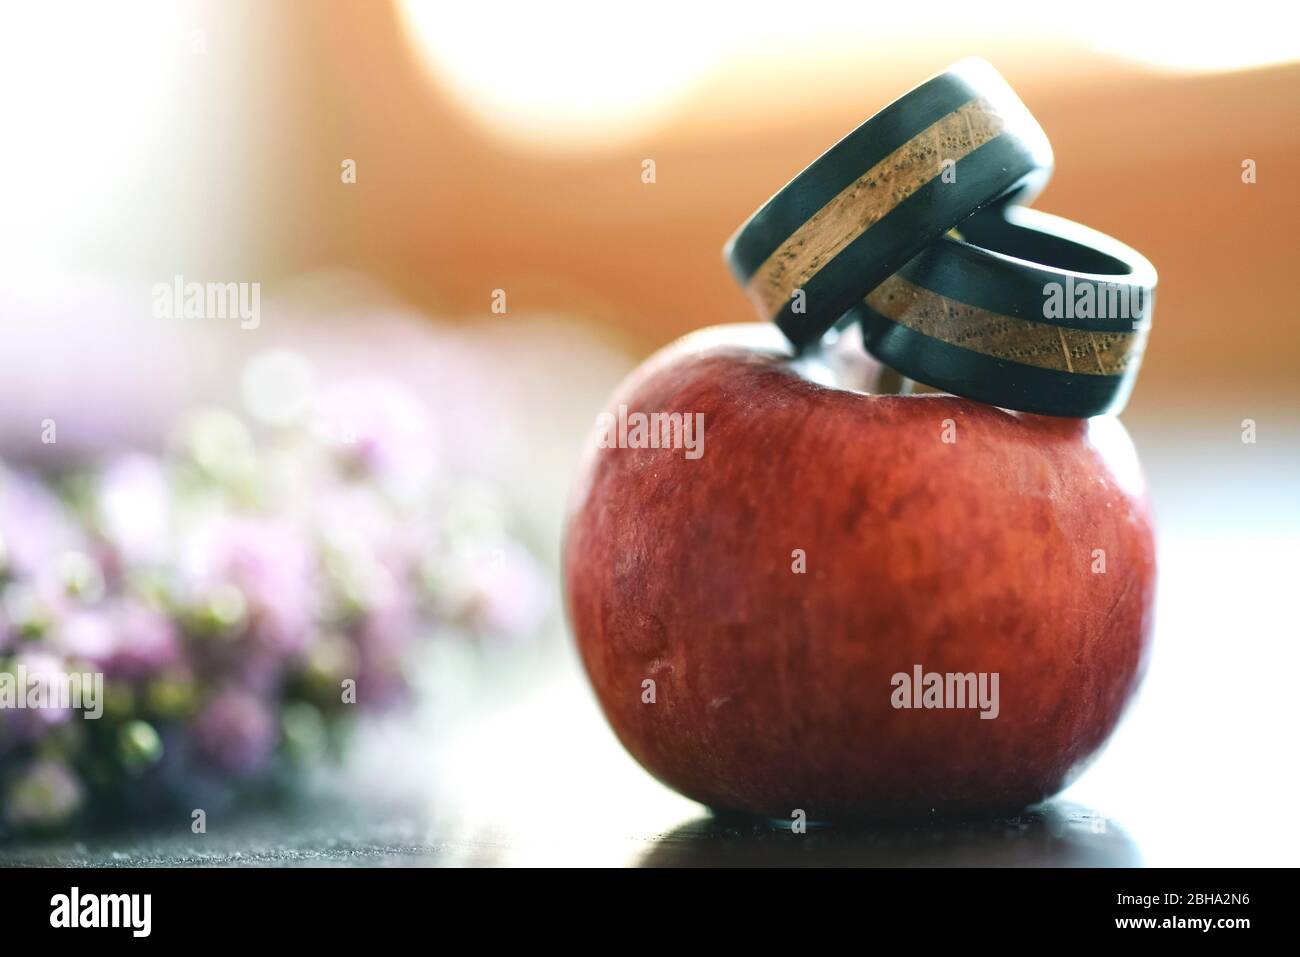 Wedding rings made of wood presented on an apple, closeup, floral arrangement, out of focus in the background Stock Photo